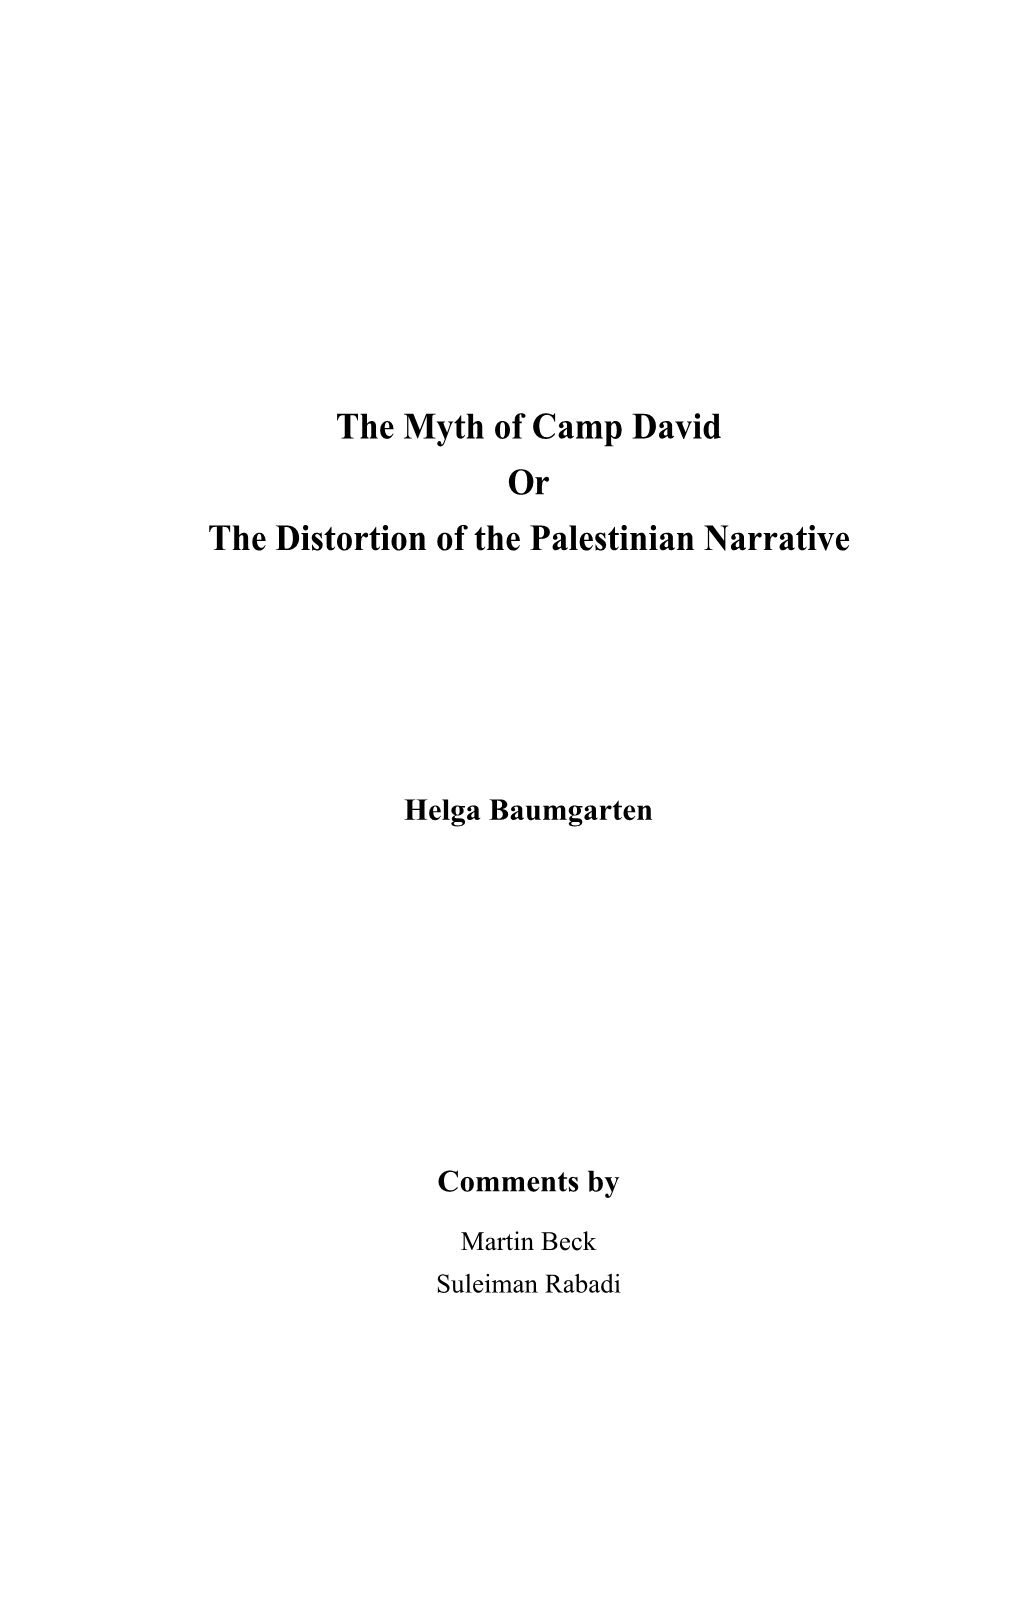 The Myth of Camp David Or the Distortion of the Palestinian Narrative